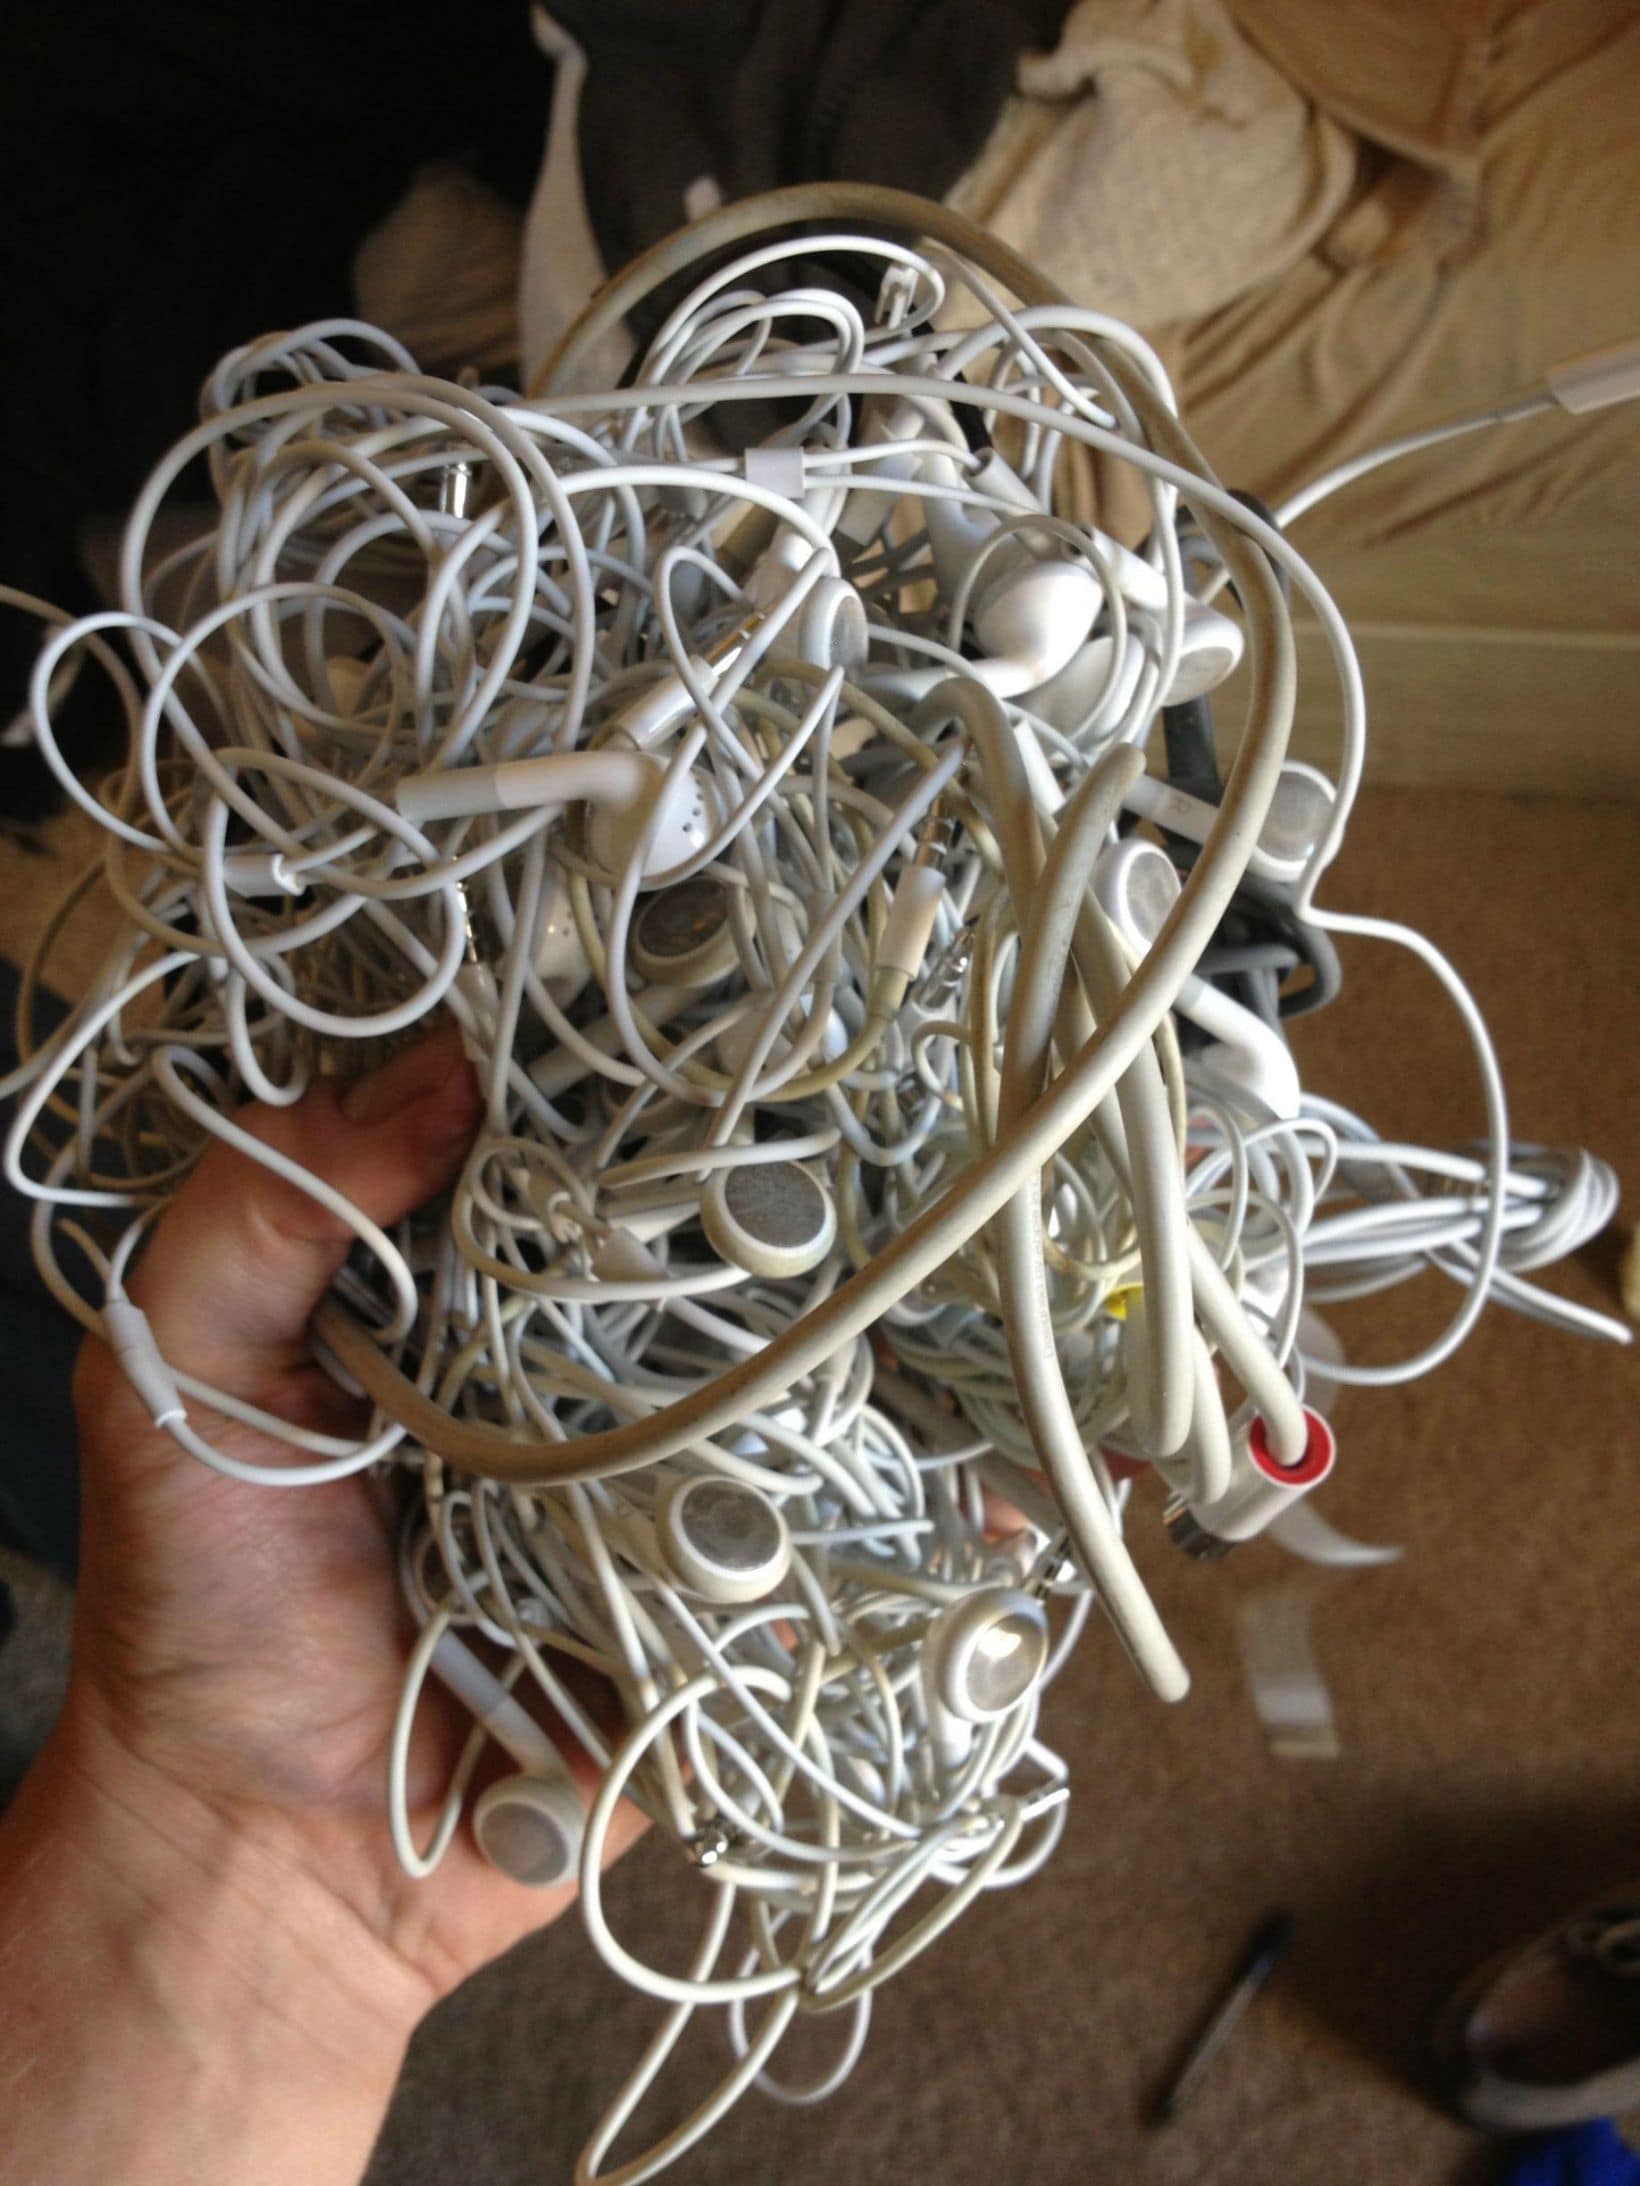 A bunch of tangled chords and headphones